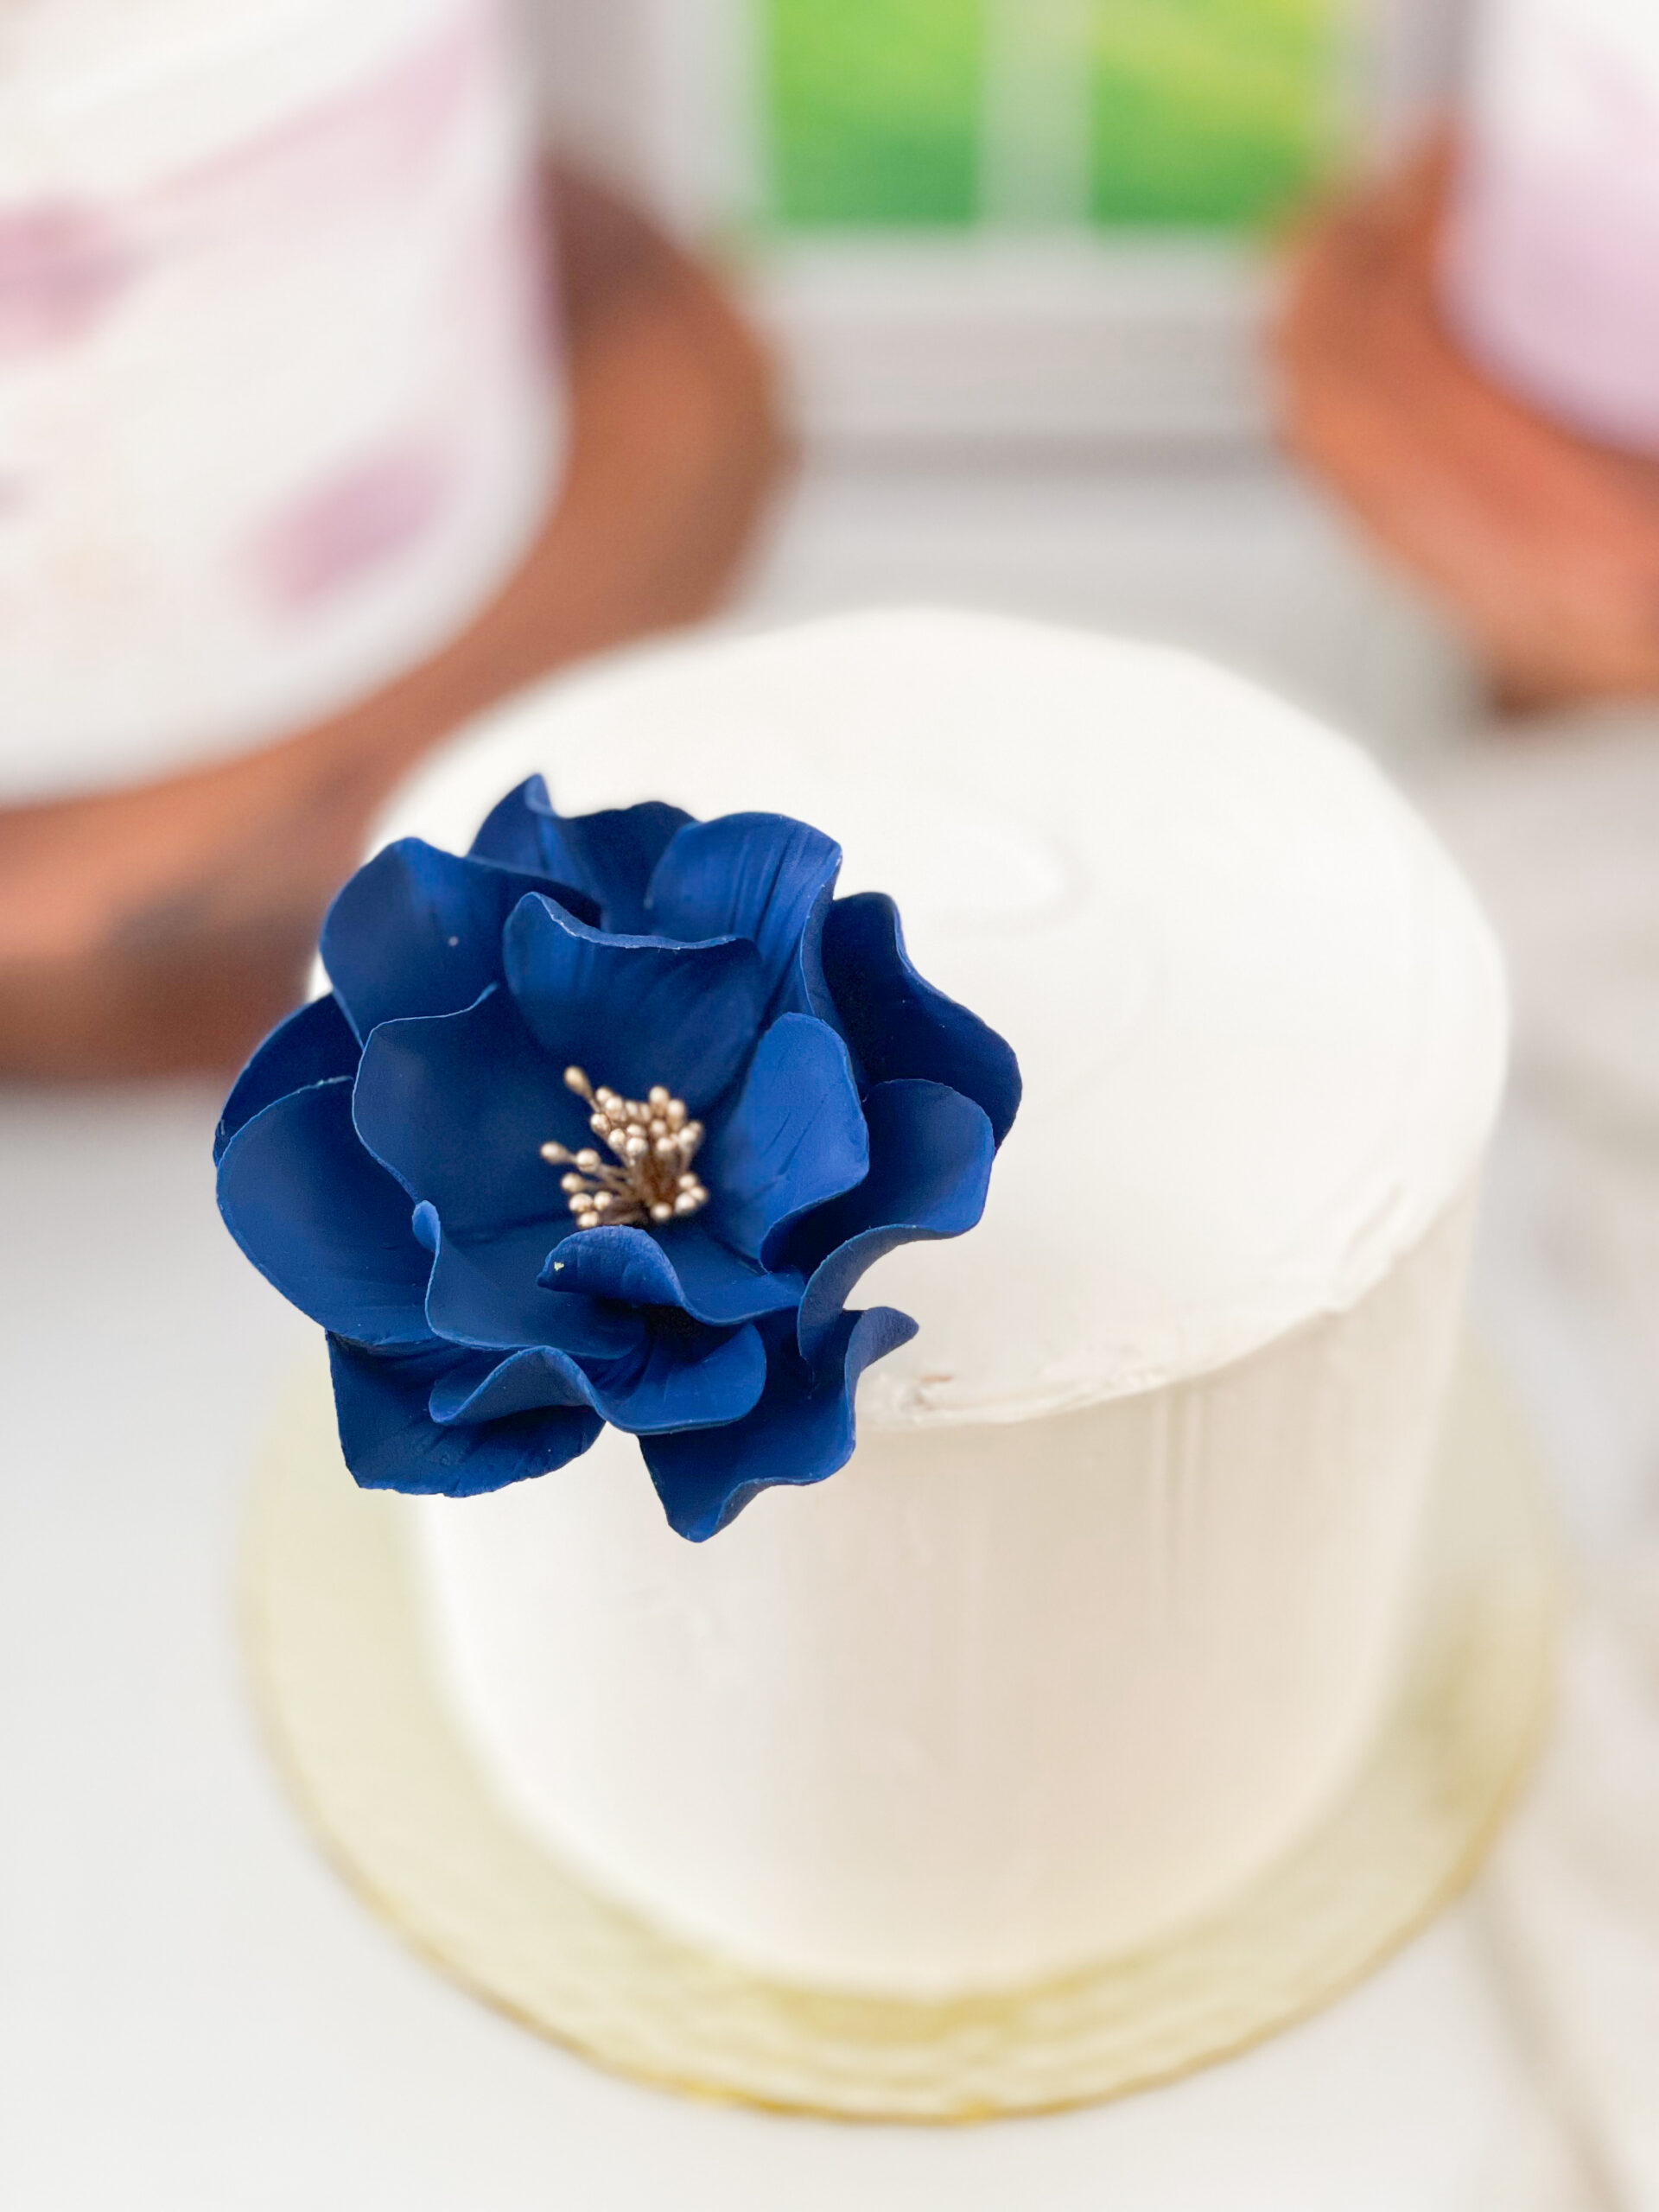 Using Replica Surfaces for Cakes? Sugar Flowers by Kelsie Cakes